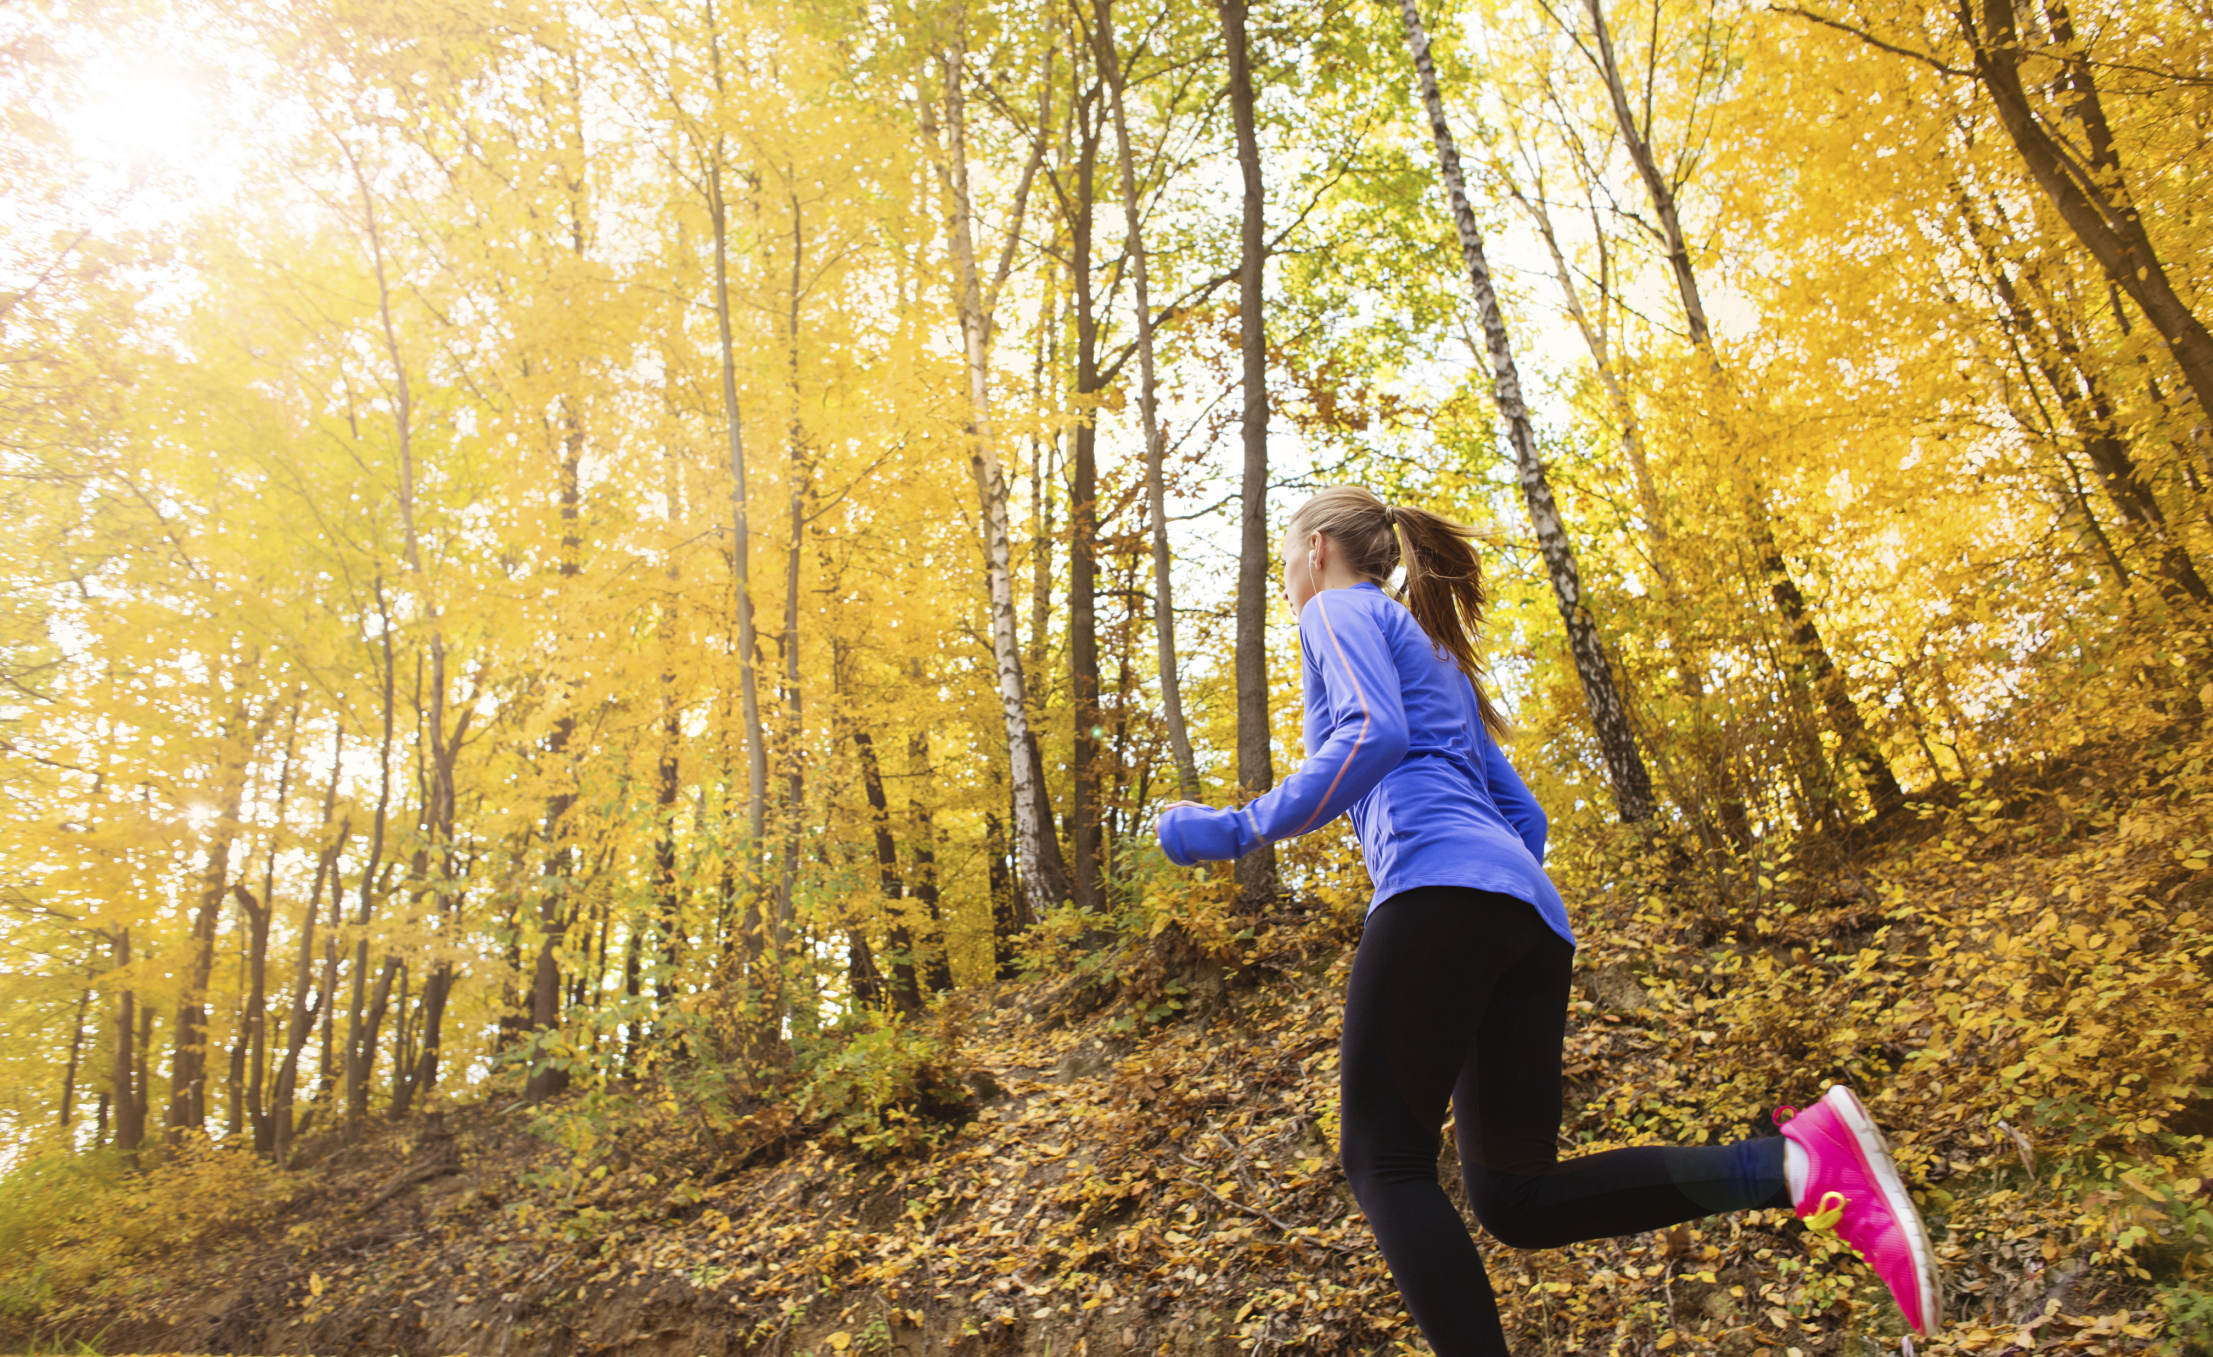 Training for a fall race? Expert tips for getting in shape - WTOP News